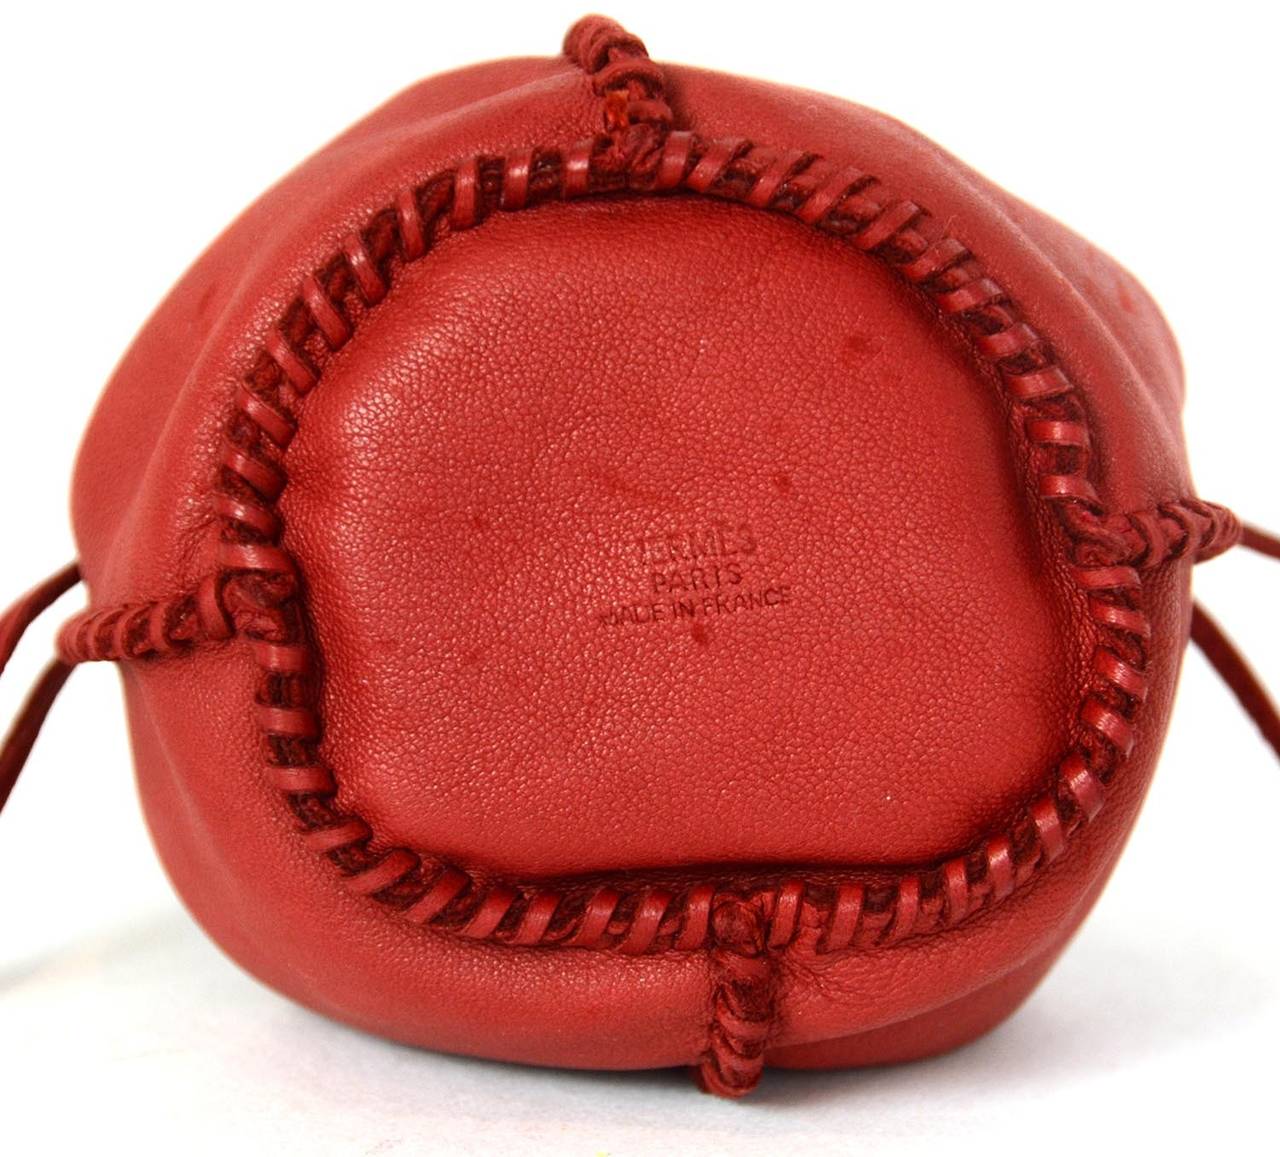 Women's or Men's Hermes Red Leather Drawstring Jewelry/Accessory Pouch with Whipstitch Detail